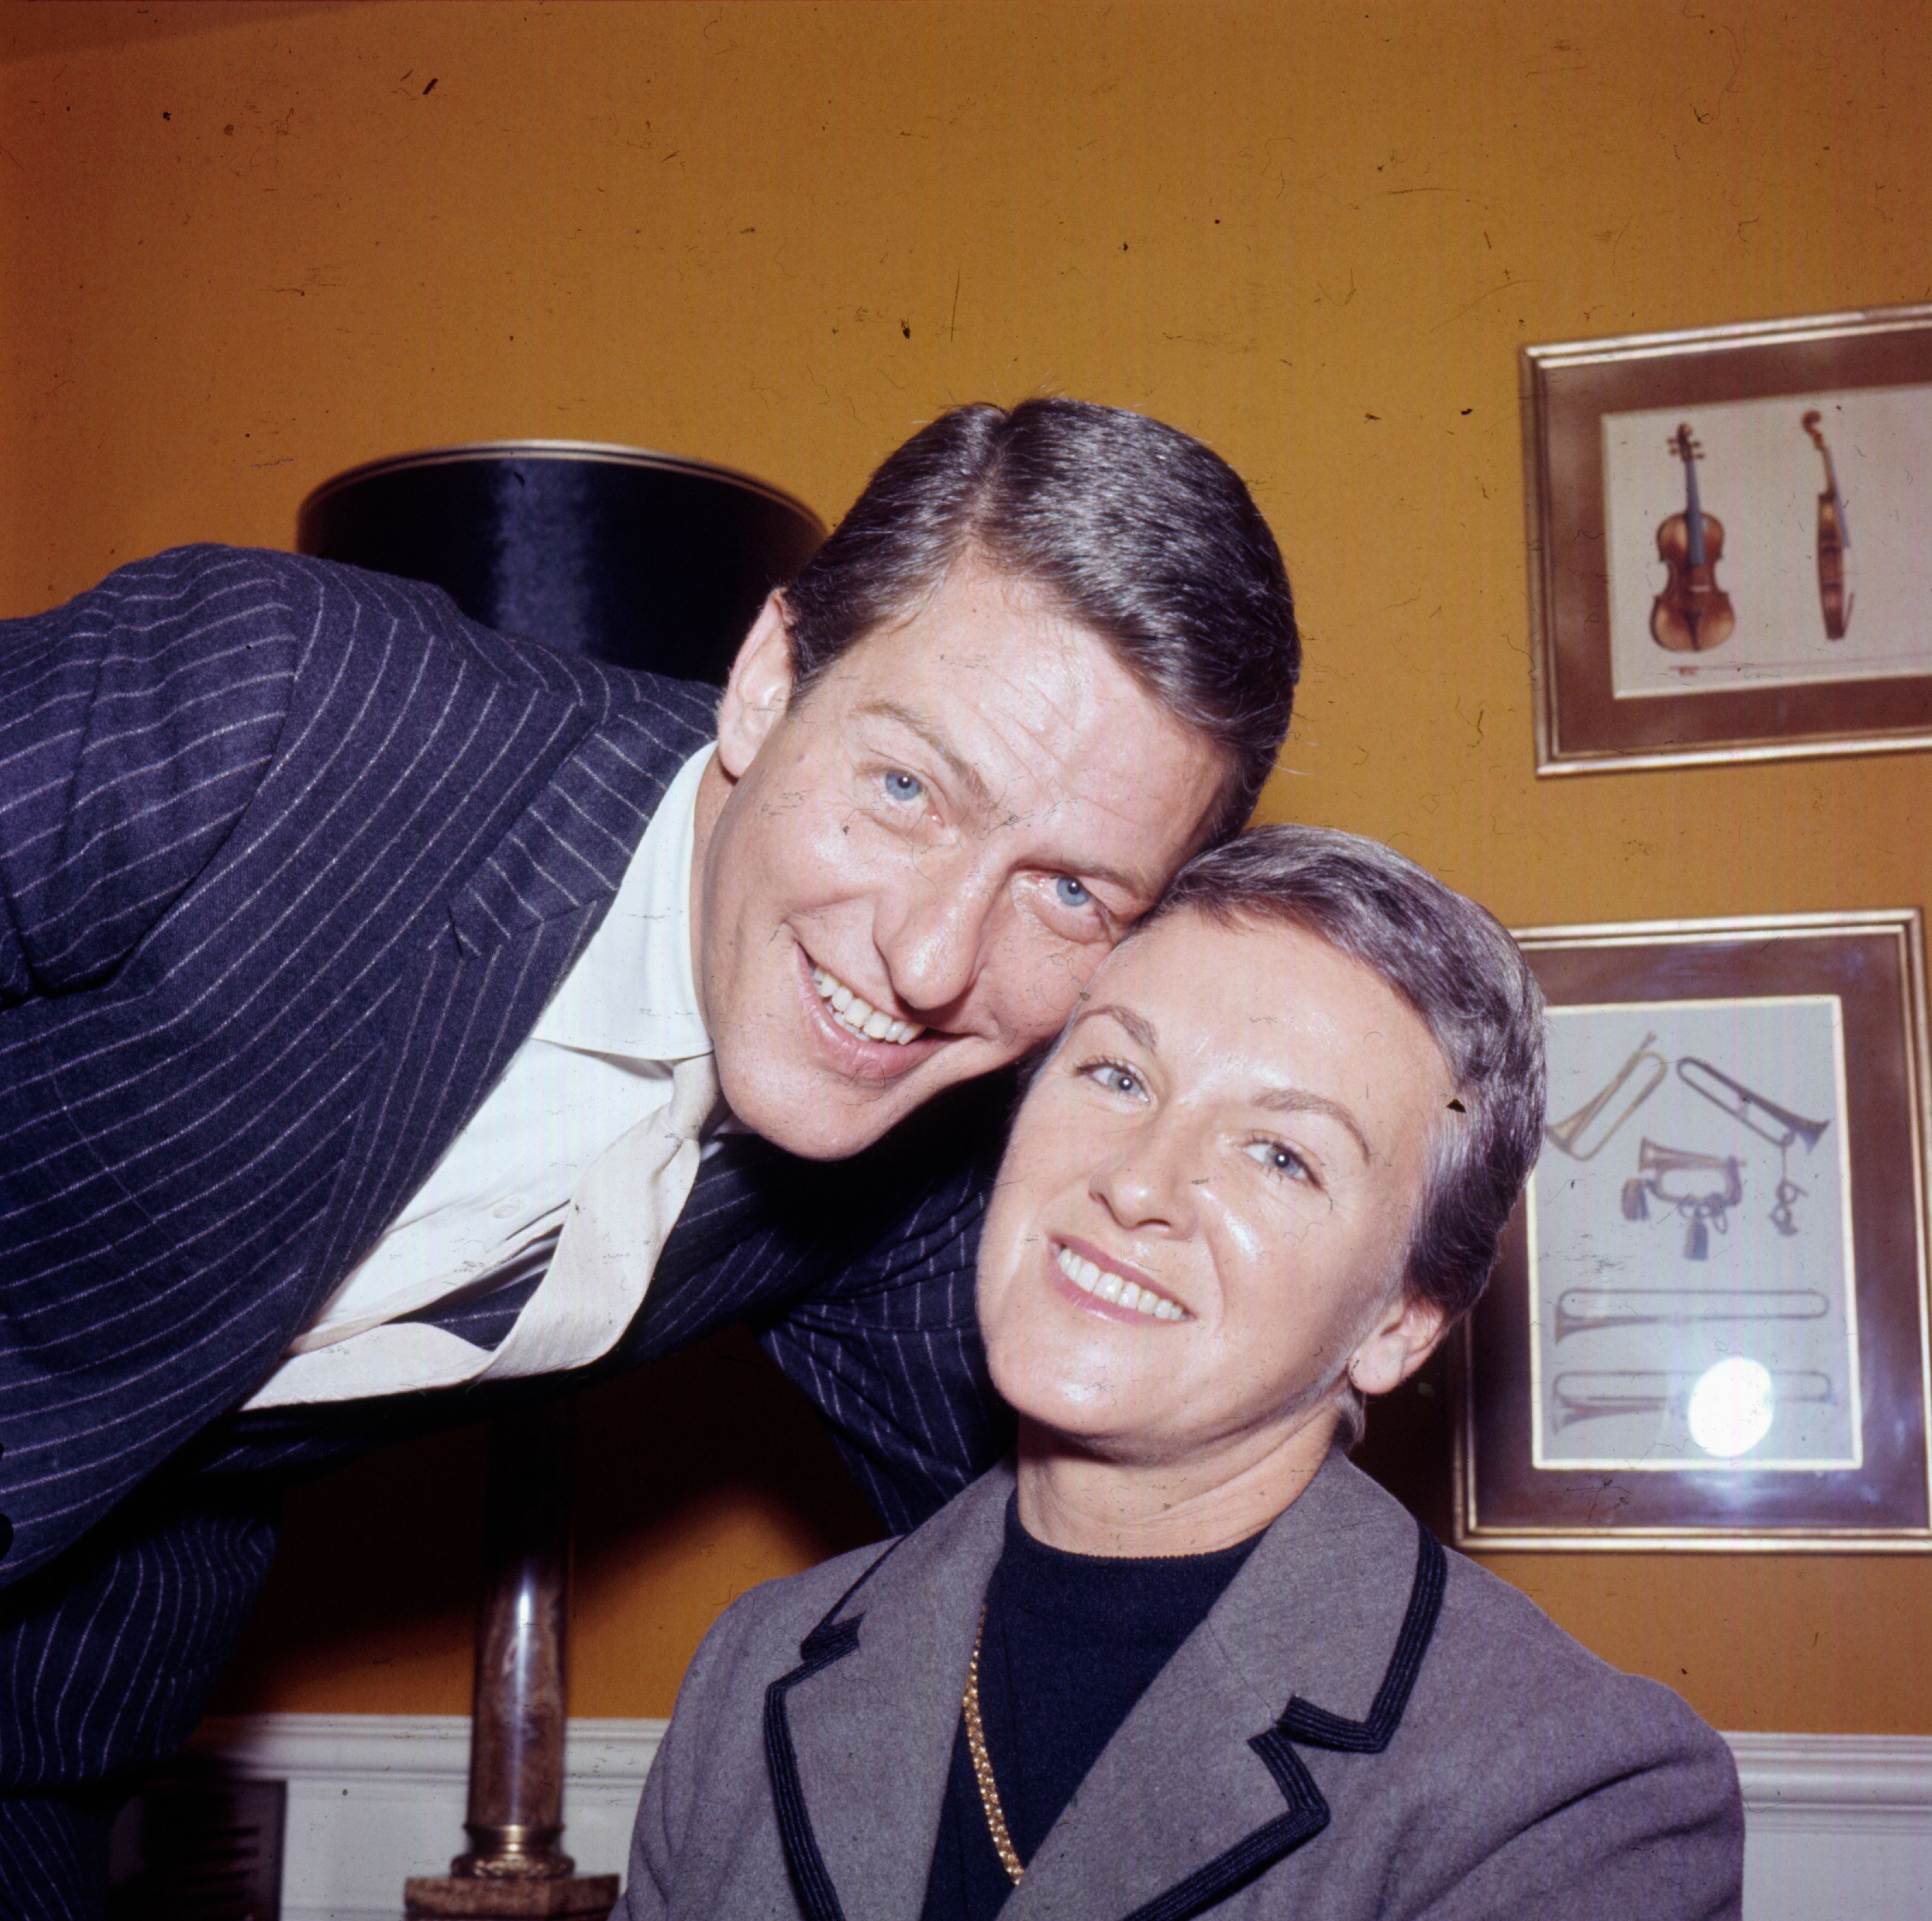 Dick Van Dyke pictured with his wife, Margie Willett, in London in 1964. | Source: Popperfoto/Getty Images